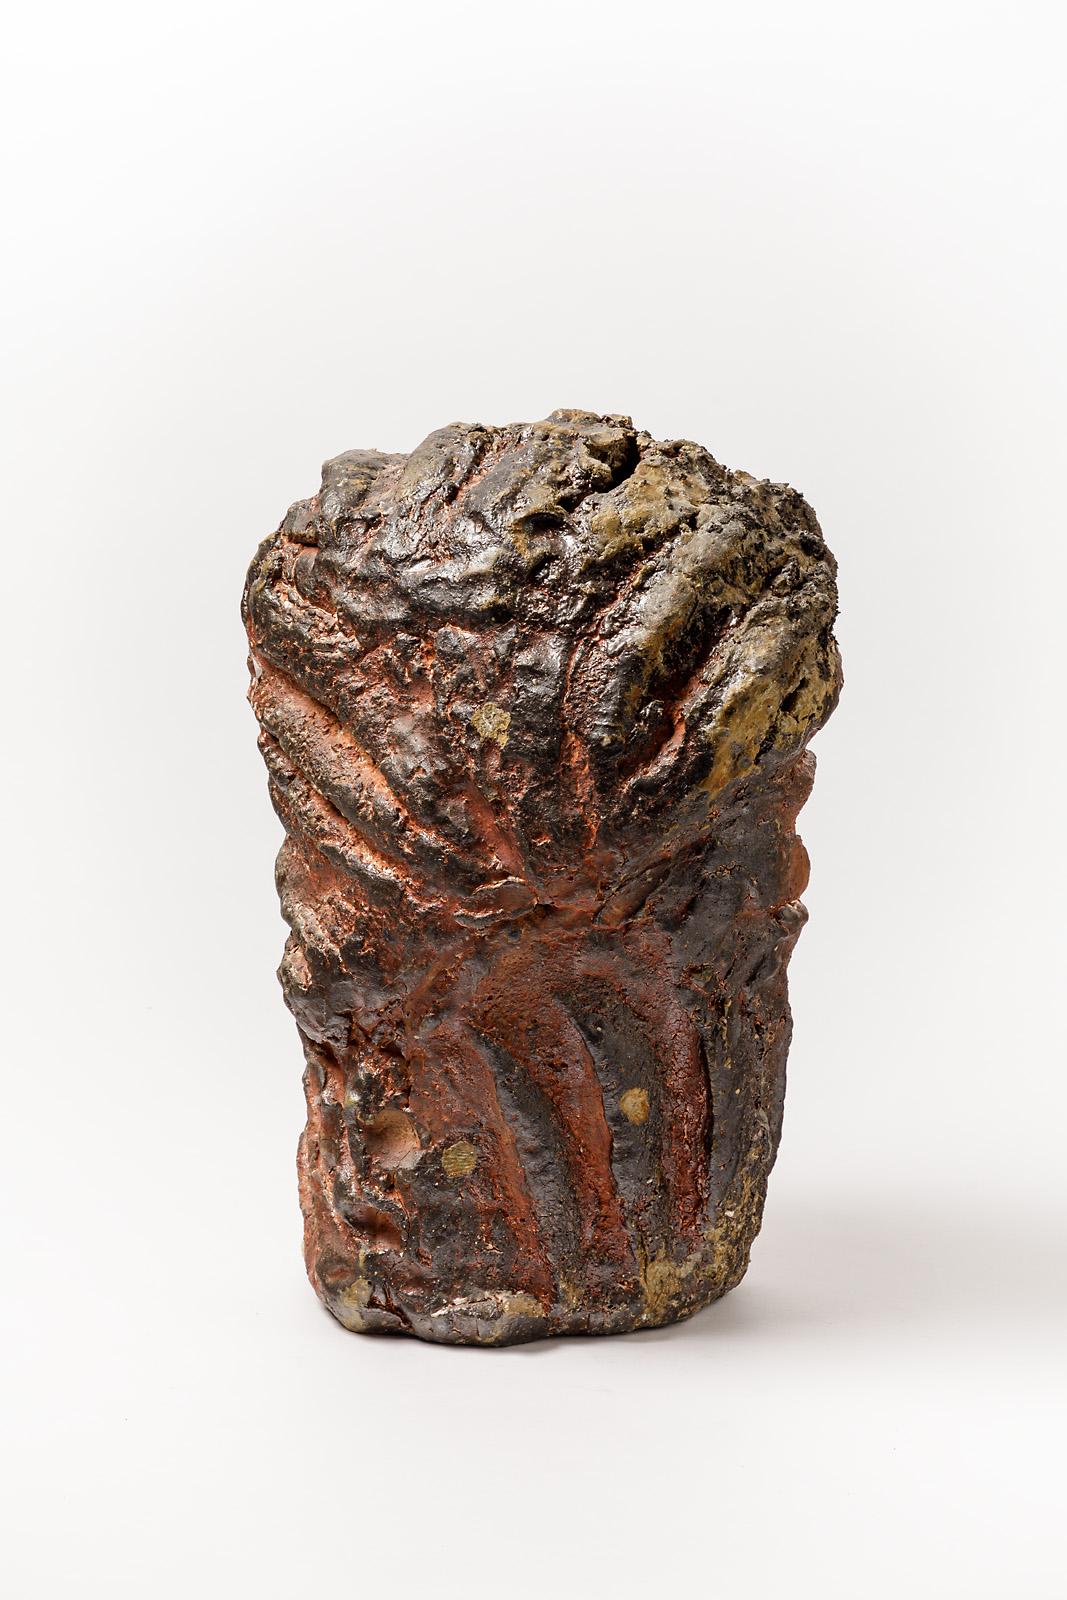 Hervé Rousseau

Abstract stoneware ceramic sculpture by the french artist.

Elegant brown stoneware ceramic glaze with firing effects.

Signed under the base, realised circa 2015.

Measures: Height 45cm, large 30cm, depth 20cm.

 